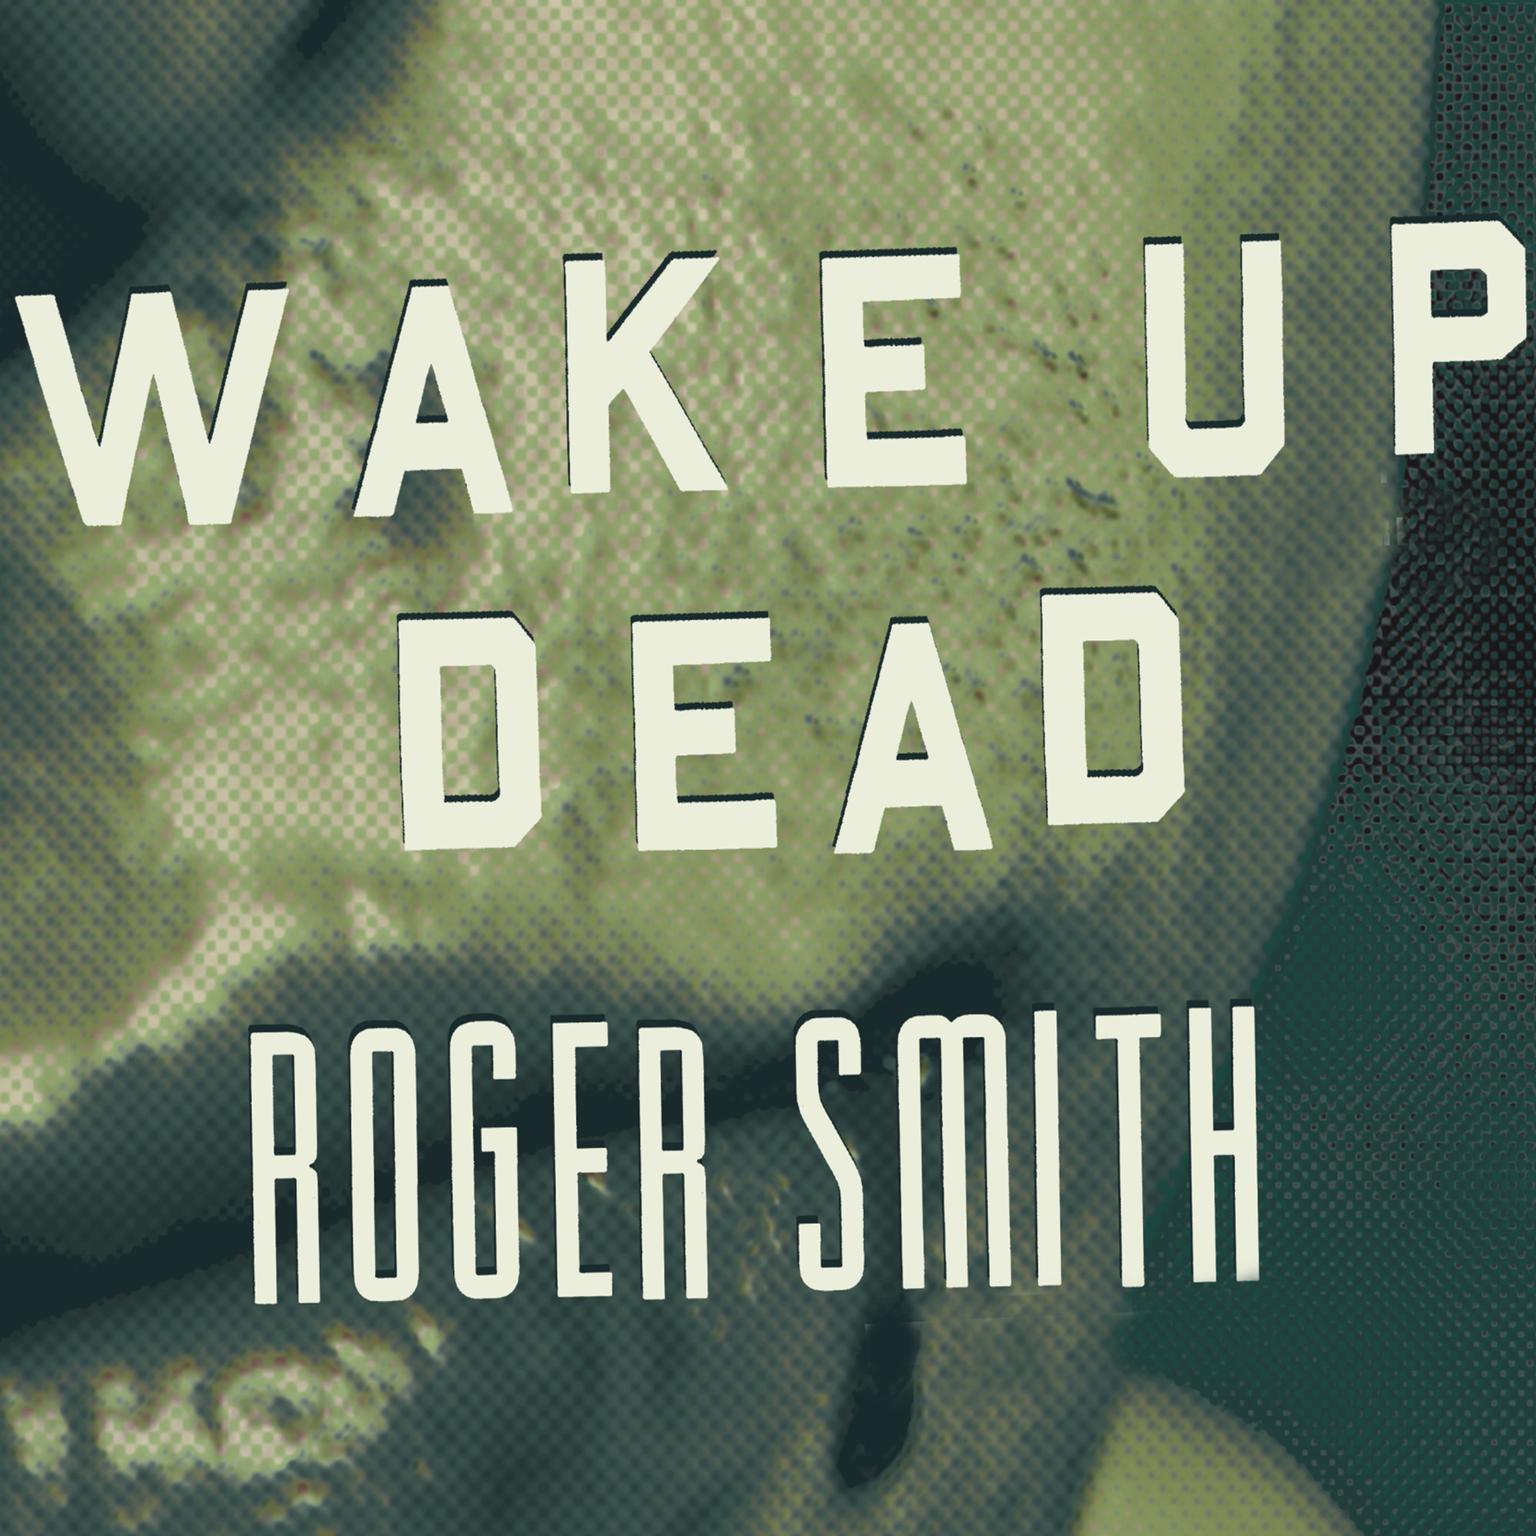 Wake Up Dead: A Thriller Audiobook, by Roger Smith